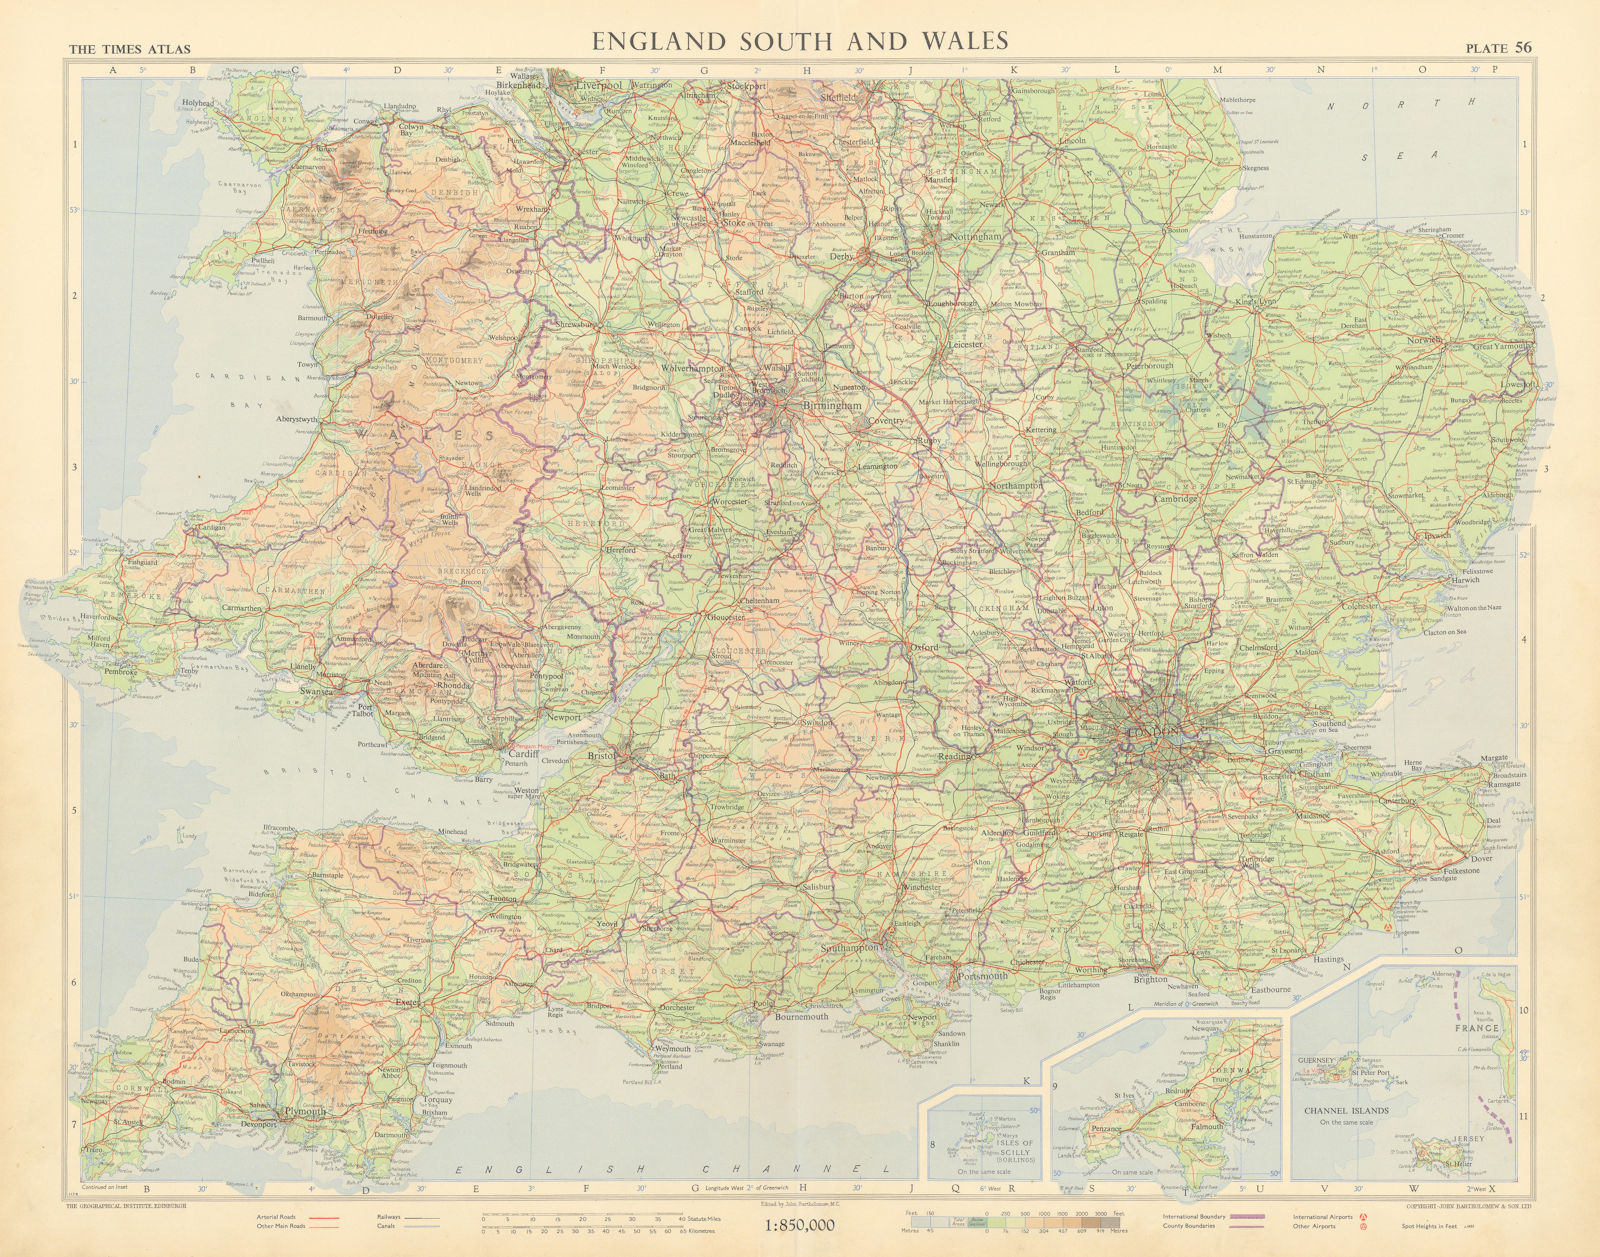 Associate Product Southern England and Wales. Road network pre motorways. TIMES 1955 old map